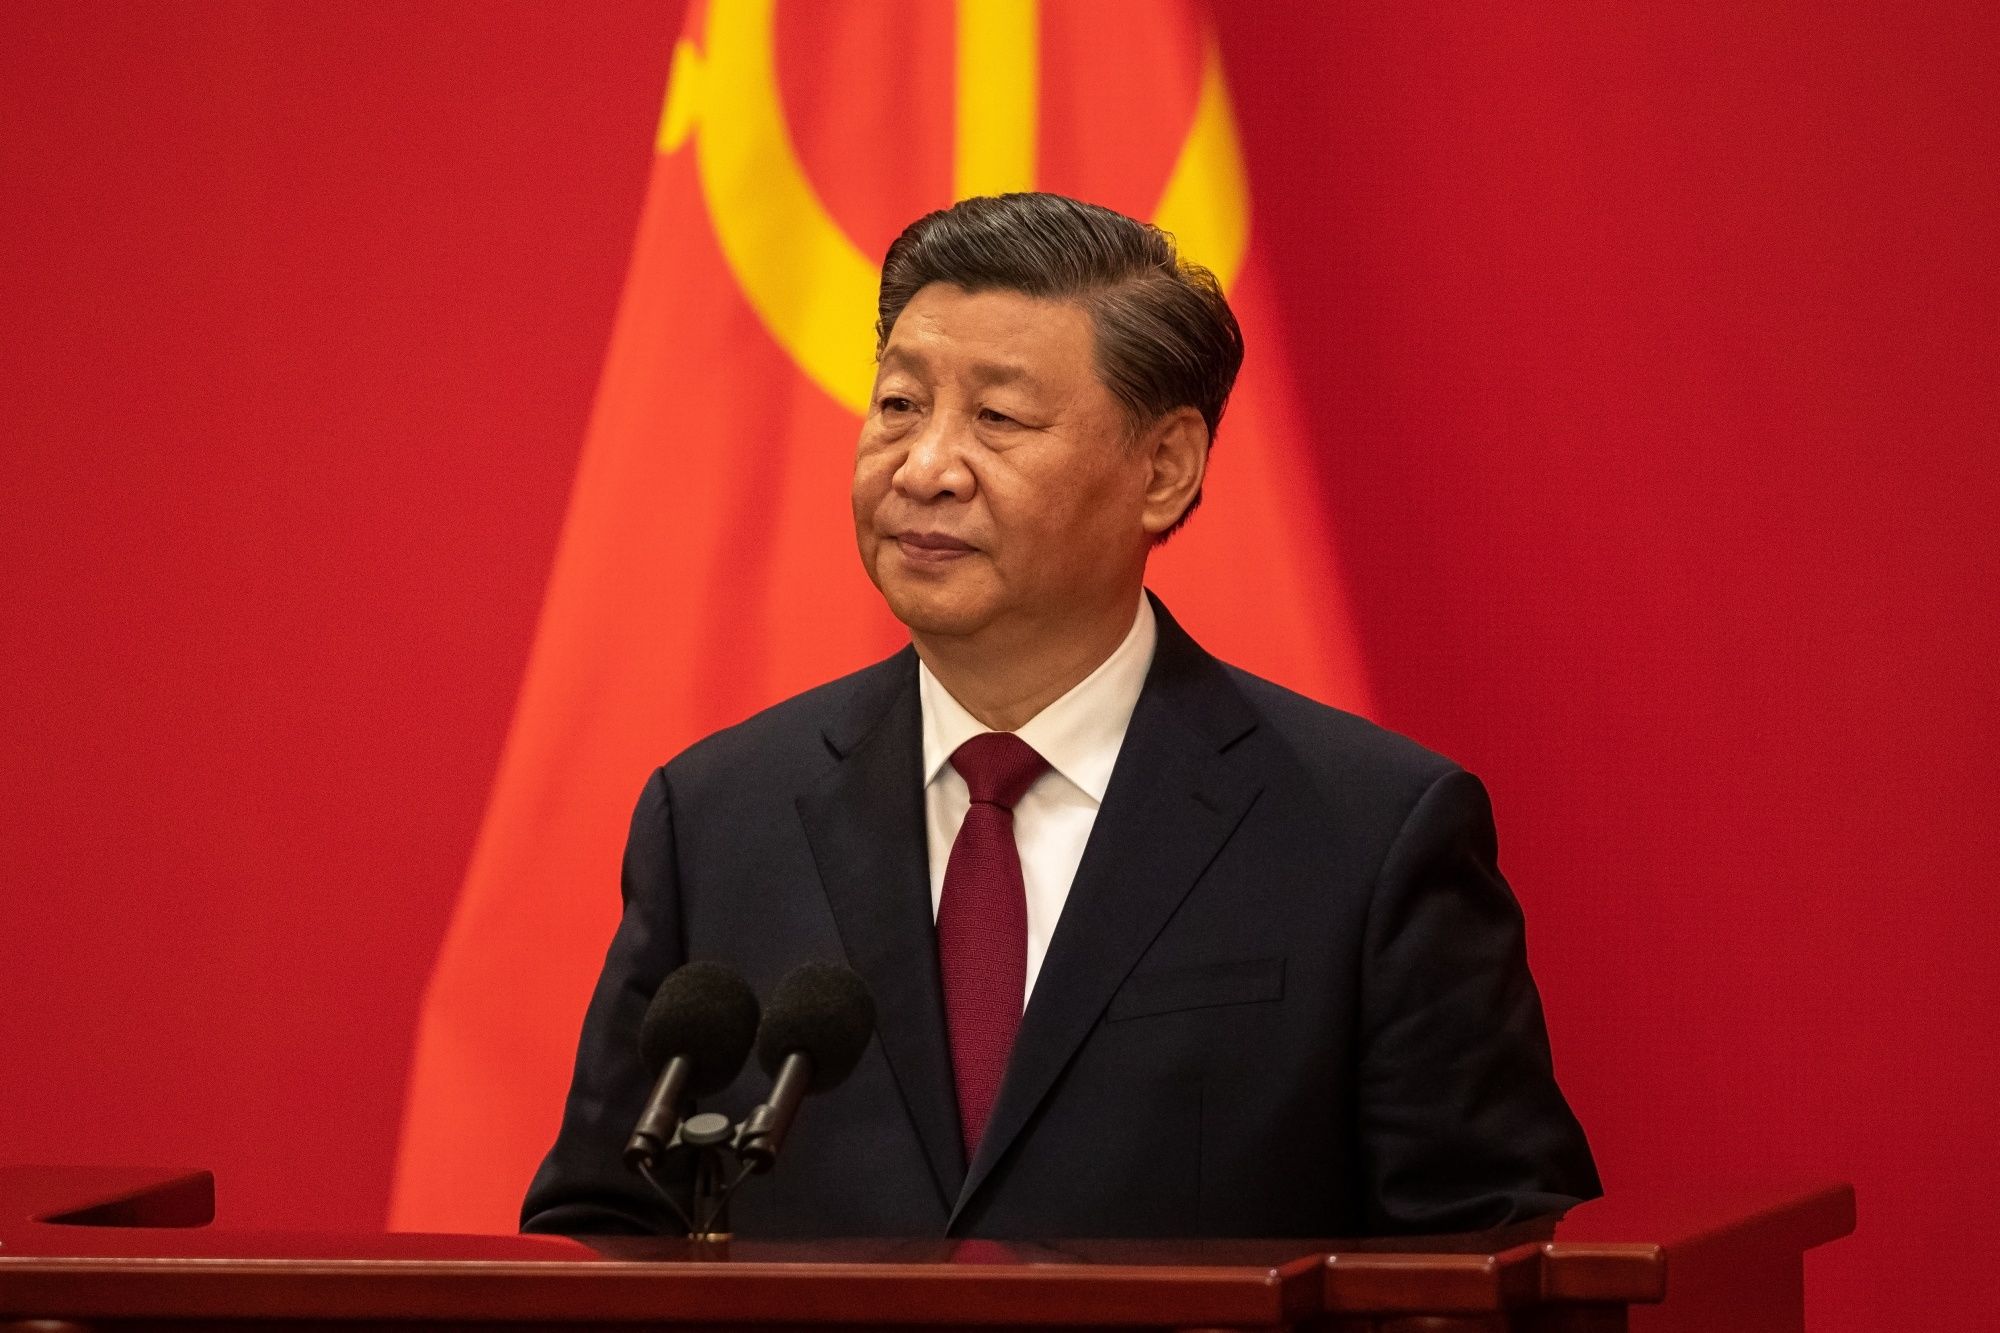 The head of the Chinese regime, Xi Jinping